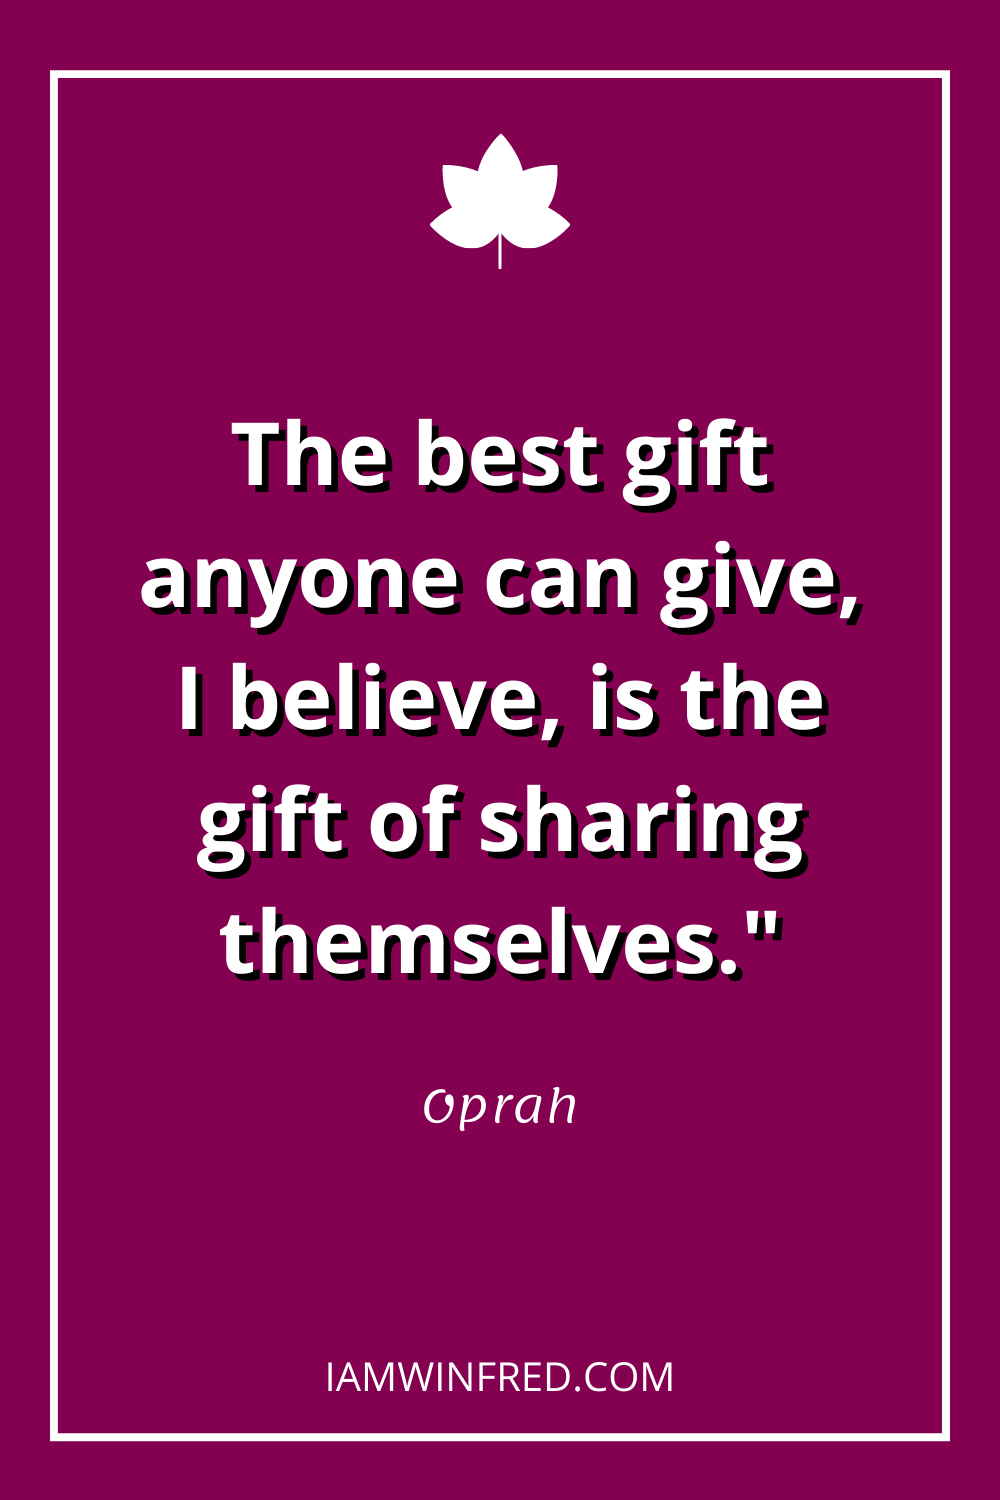 The Best Gift Anyone Can Give I Believe Is The Gift Of Sharing Themselves.